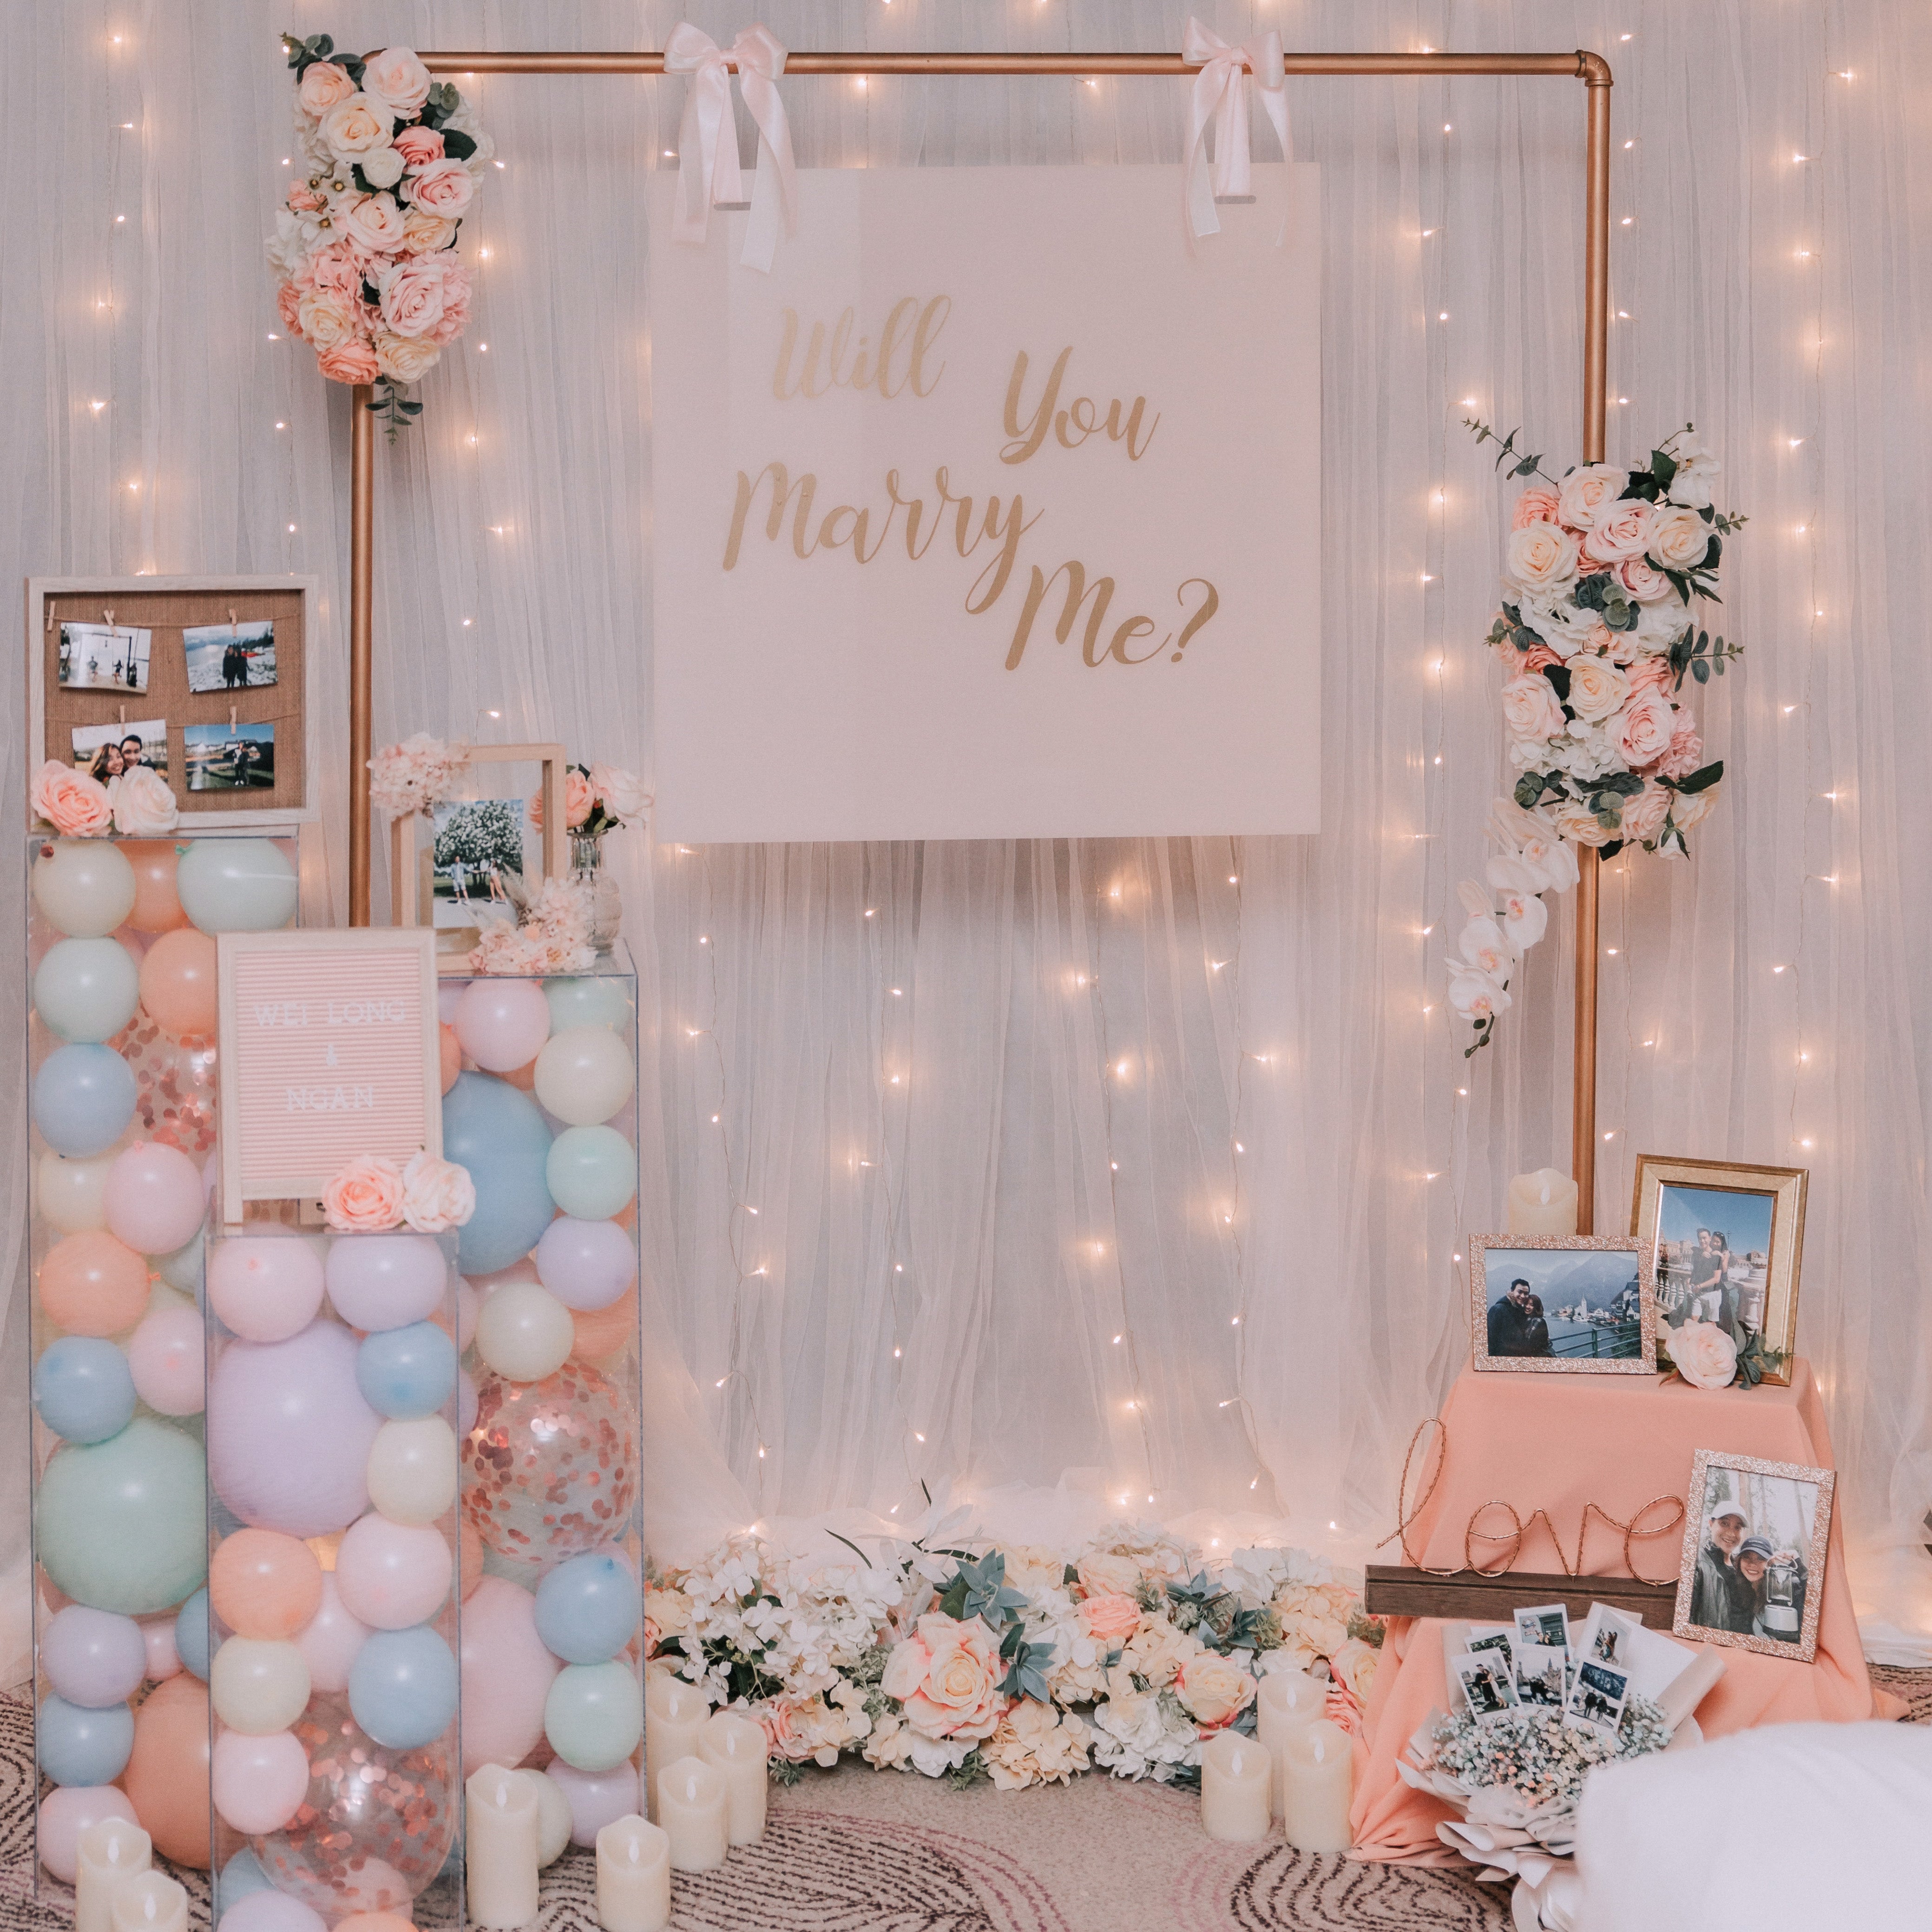 Romantic Hotel Room Proposal Decor in W Singapore Sentosa with Fairylight Backdrop, Pastel Balloons and Flowers by Style It Simply